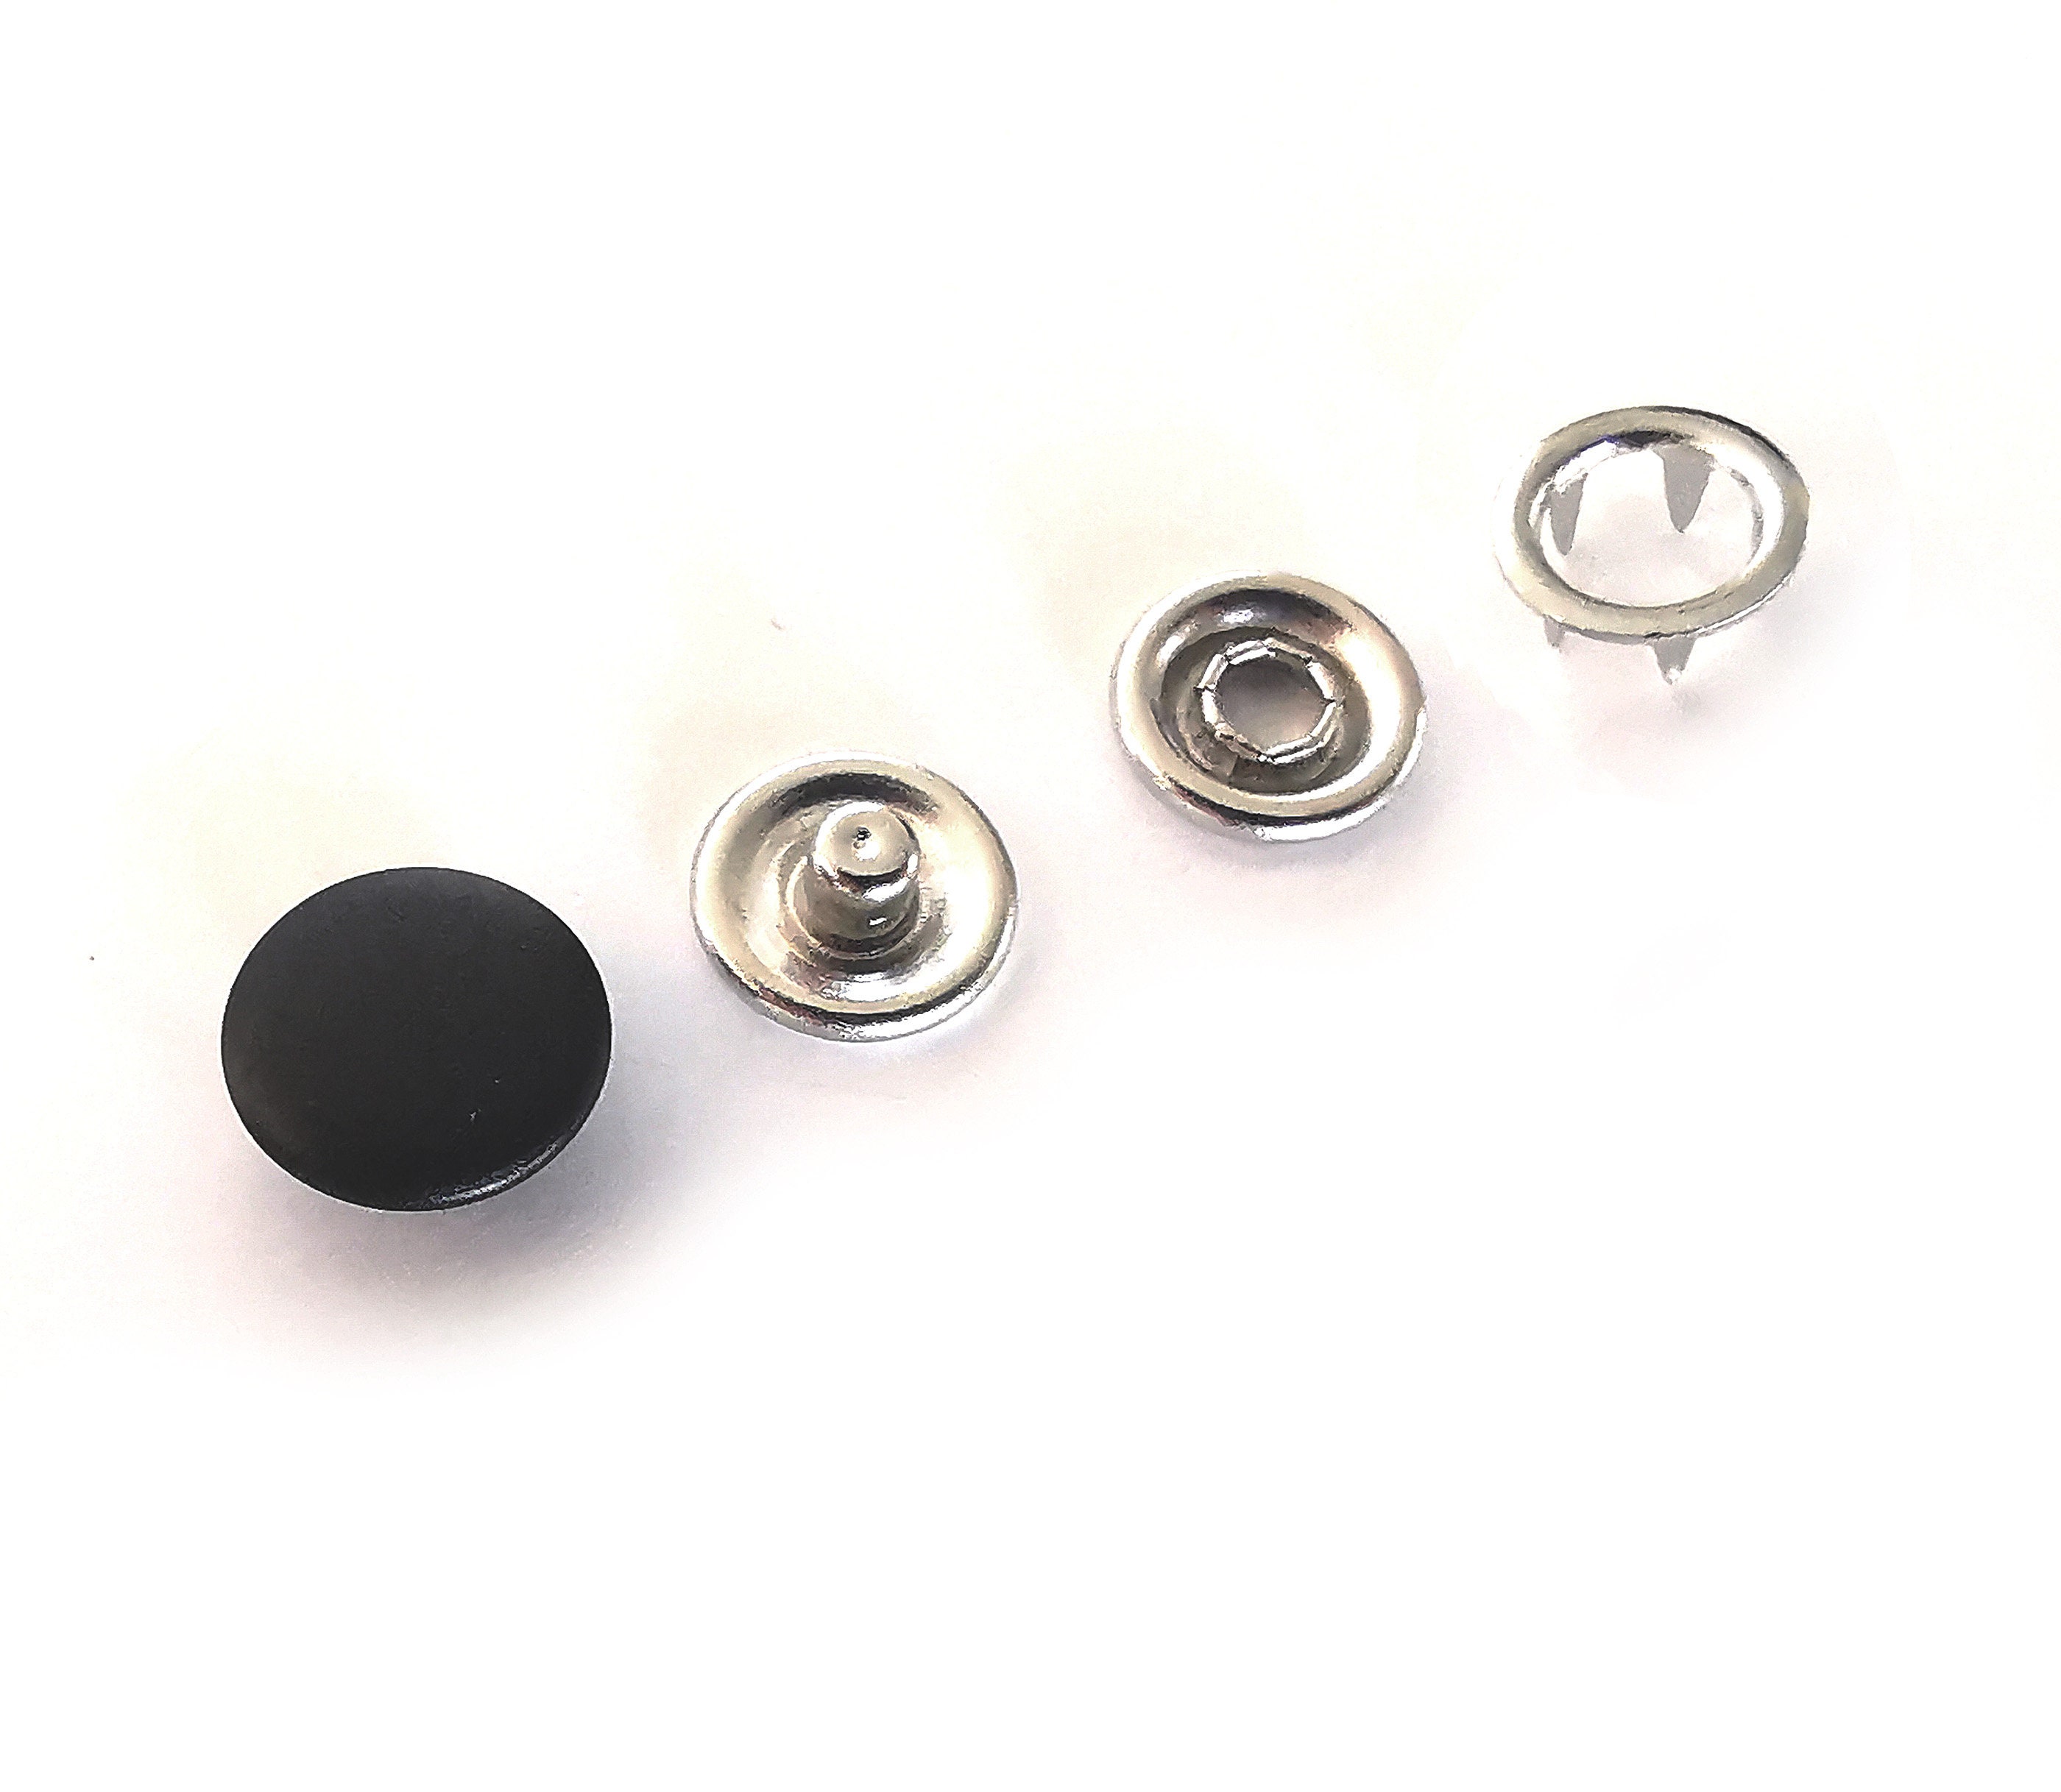 25 Sets Matte Black Snap Buttons Size 15, Metal Snaps for Clothing, 9.5mm  Prong Cap Snap Fasteners, No Sew Gripper Snaps, Baby Clothes Snaps 